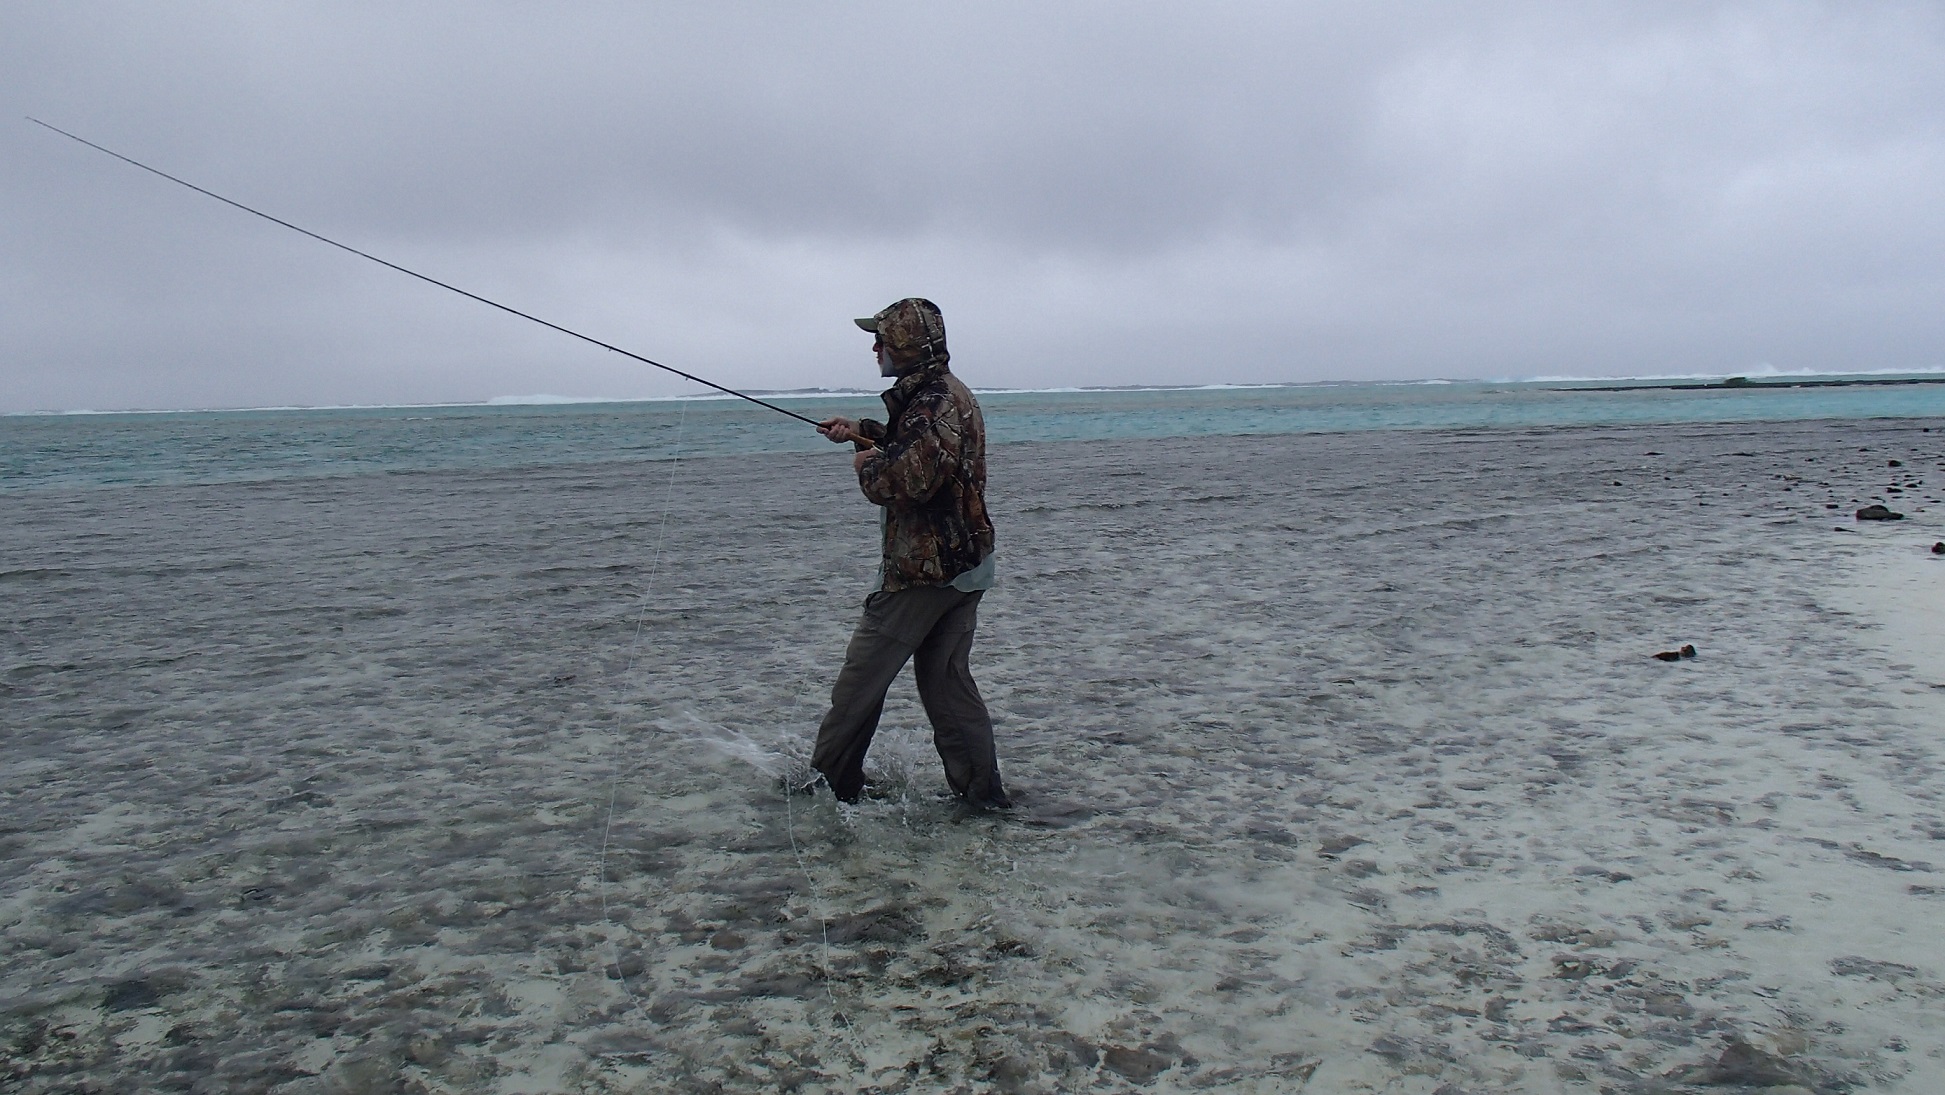 Fly fishing in the salt water in very windy conditions